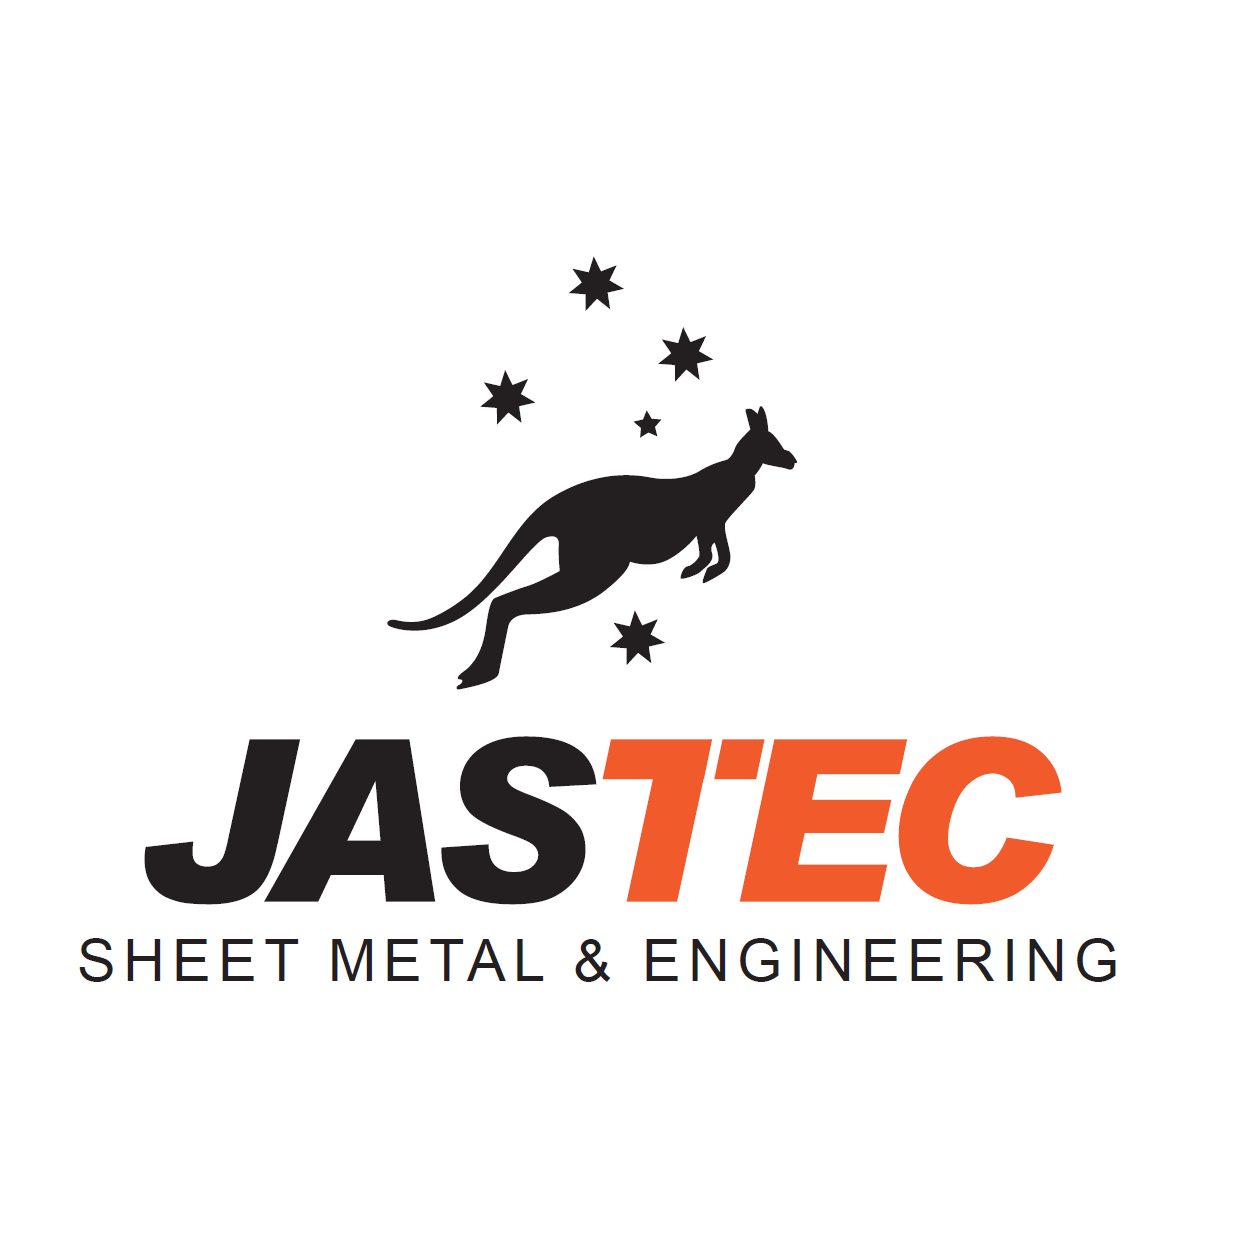 Jastec Sheet Metal and Engineering - Delacombe, VIC 3356 - (03) 5332 1796 | ShowMeLocal.com